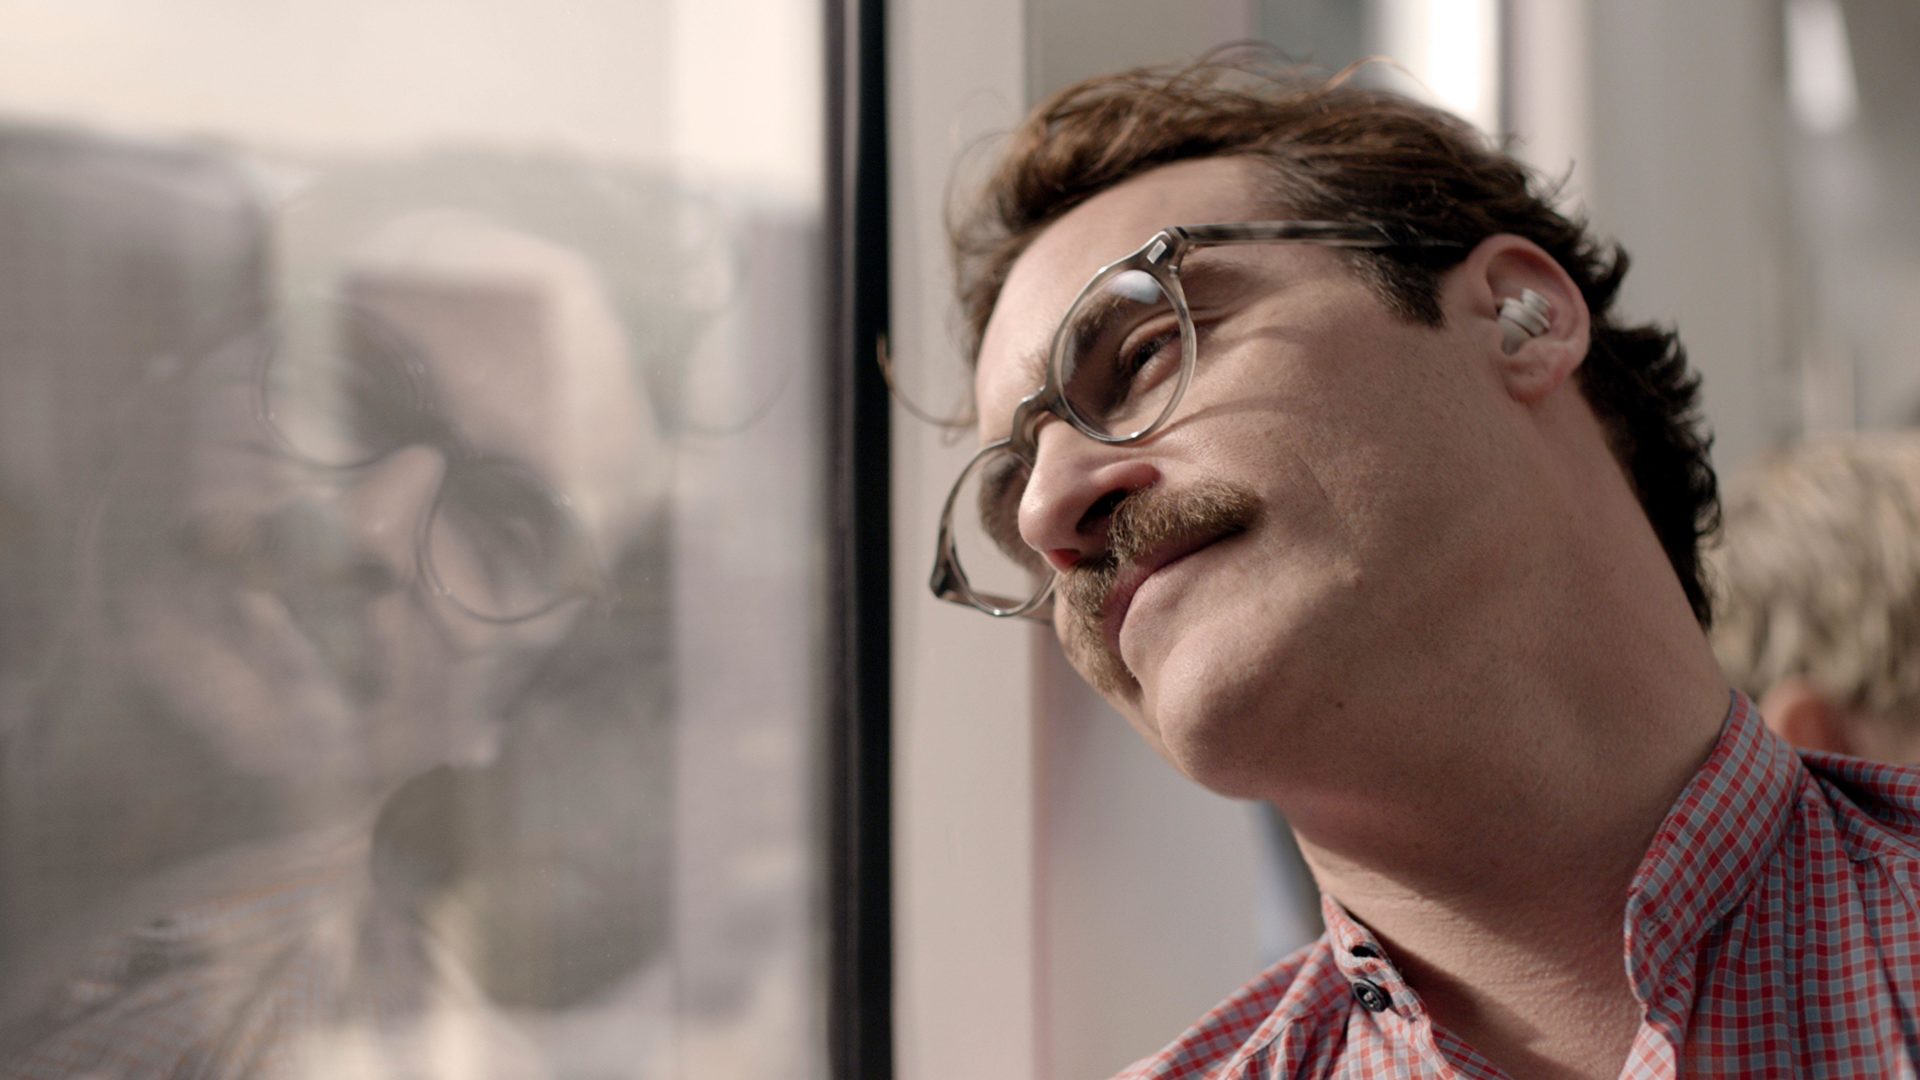 Joaquin Phoenix in Her, a film about a man who falls in love with an AI chatbot. Image: BFA / WB